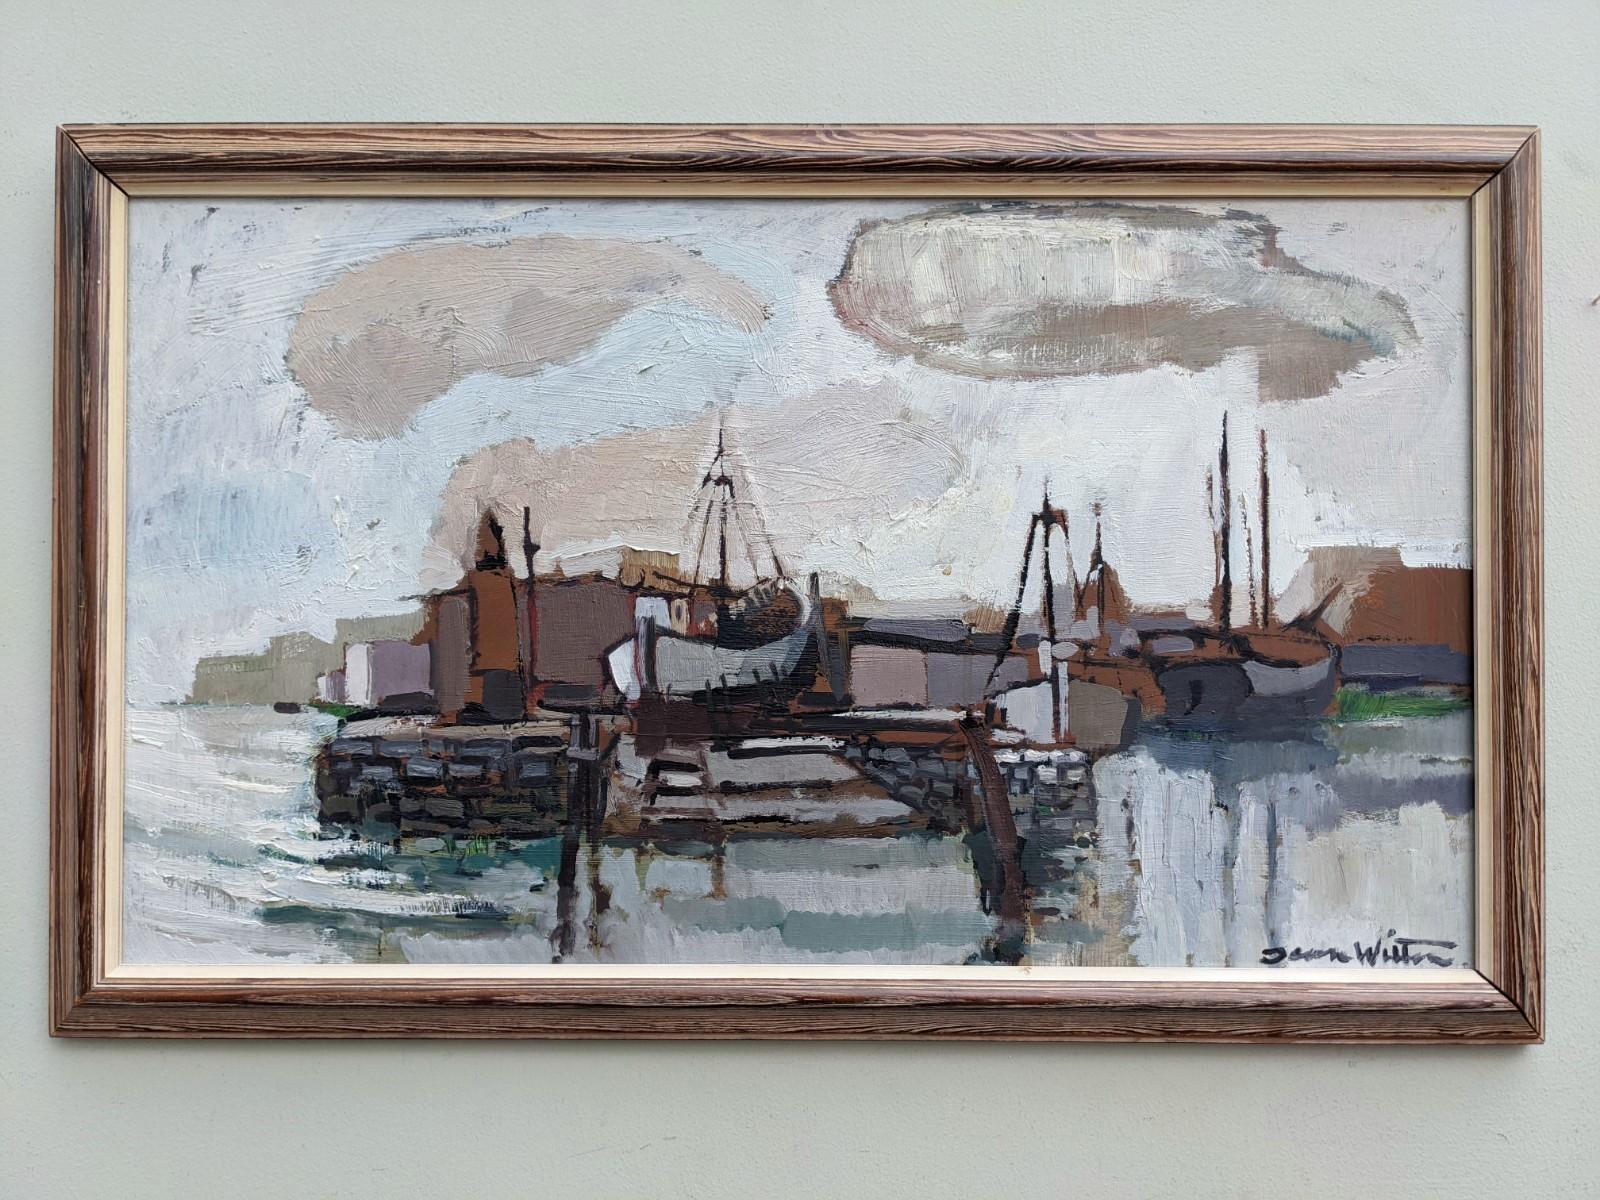 OUT AT SEA
Size: 40 x 65 cm (including frame)
Oil on Board

An outstanding mid century modernist seascape composition, executed in oil onto board.

The painting depicts a scene of boats lined up by a harbour on a cloudy day. There is calm and